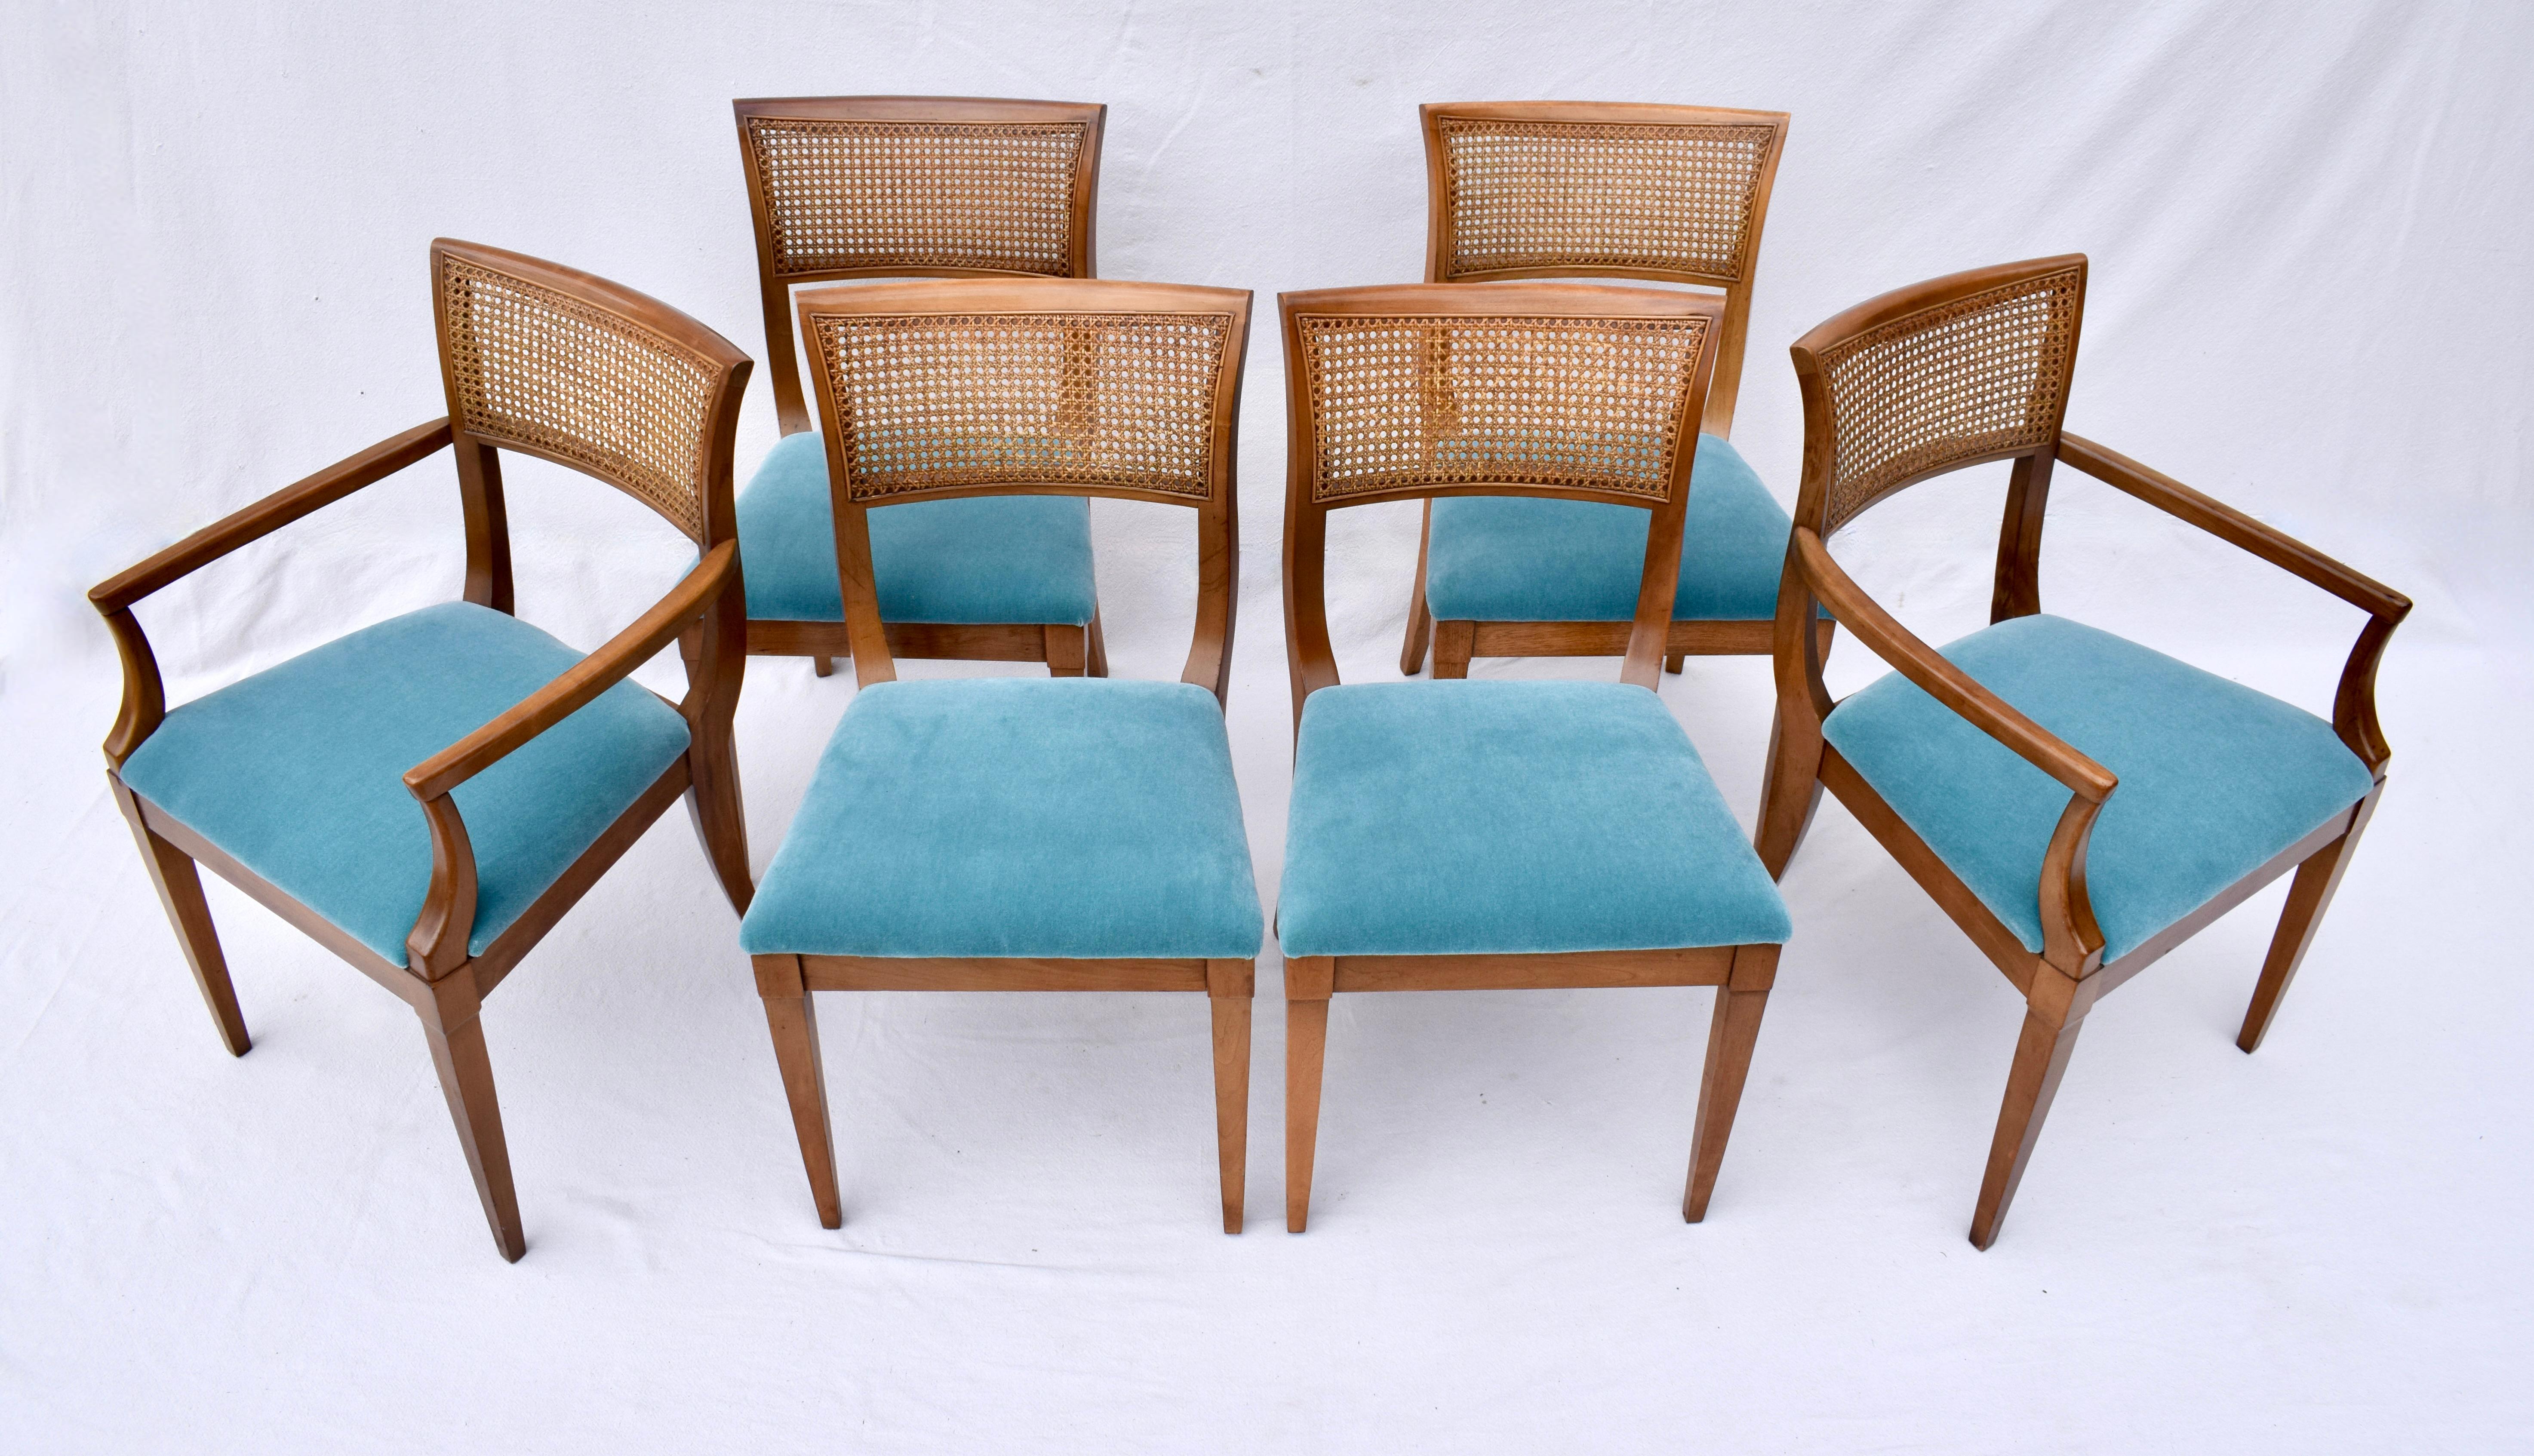 An impressive set of six cherry wood cane back dining chairs newly upholstered in plush teal Mohair consisting of four side chairs & two captains chairs. Attributed to Baker Furniture in the Regency style this transitional & timeless design is